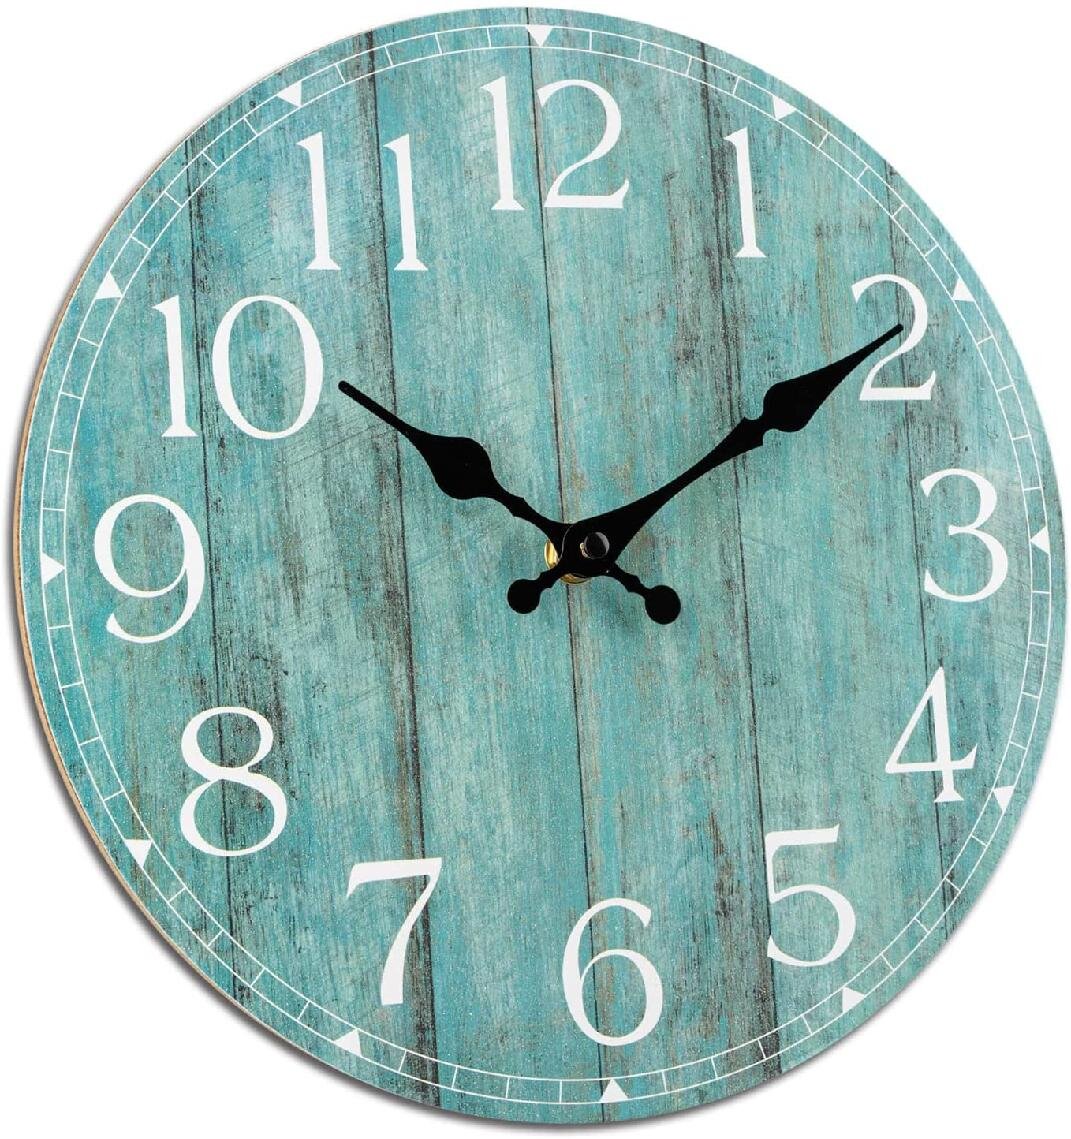 Large 20.5 in Round Decorative Patchwork Analog Wall Clock Modern Home Decor 